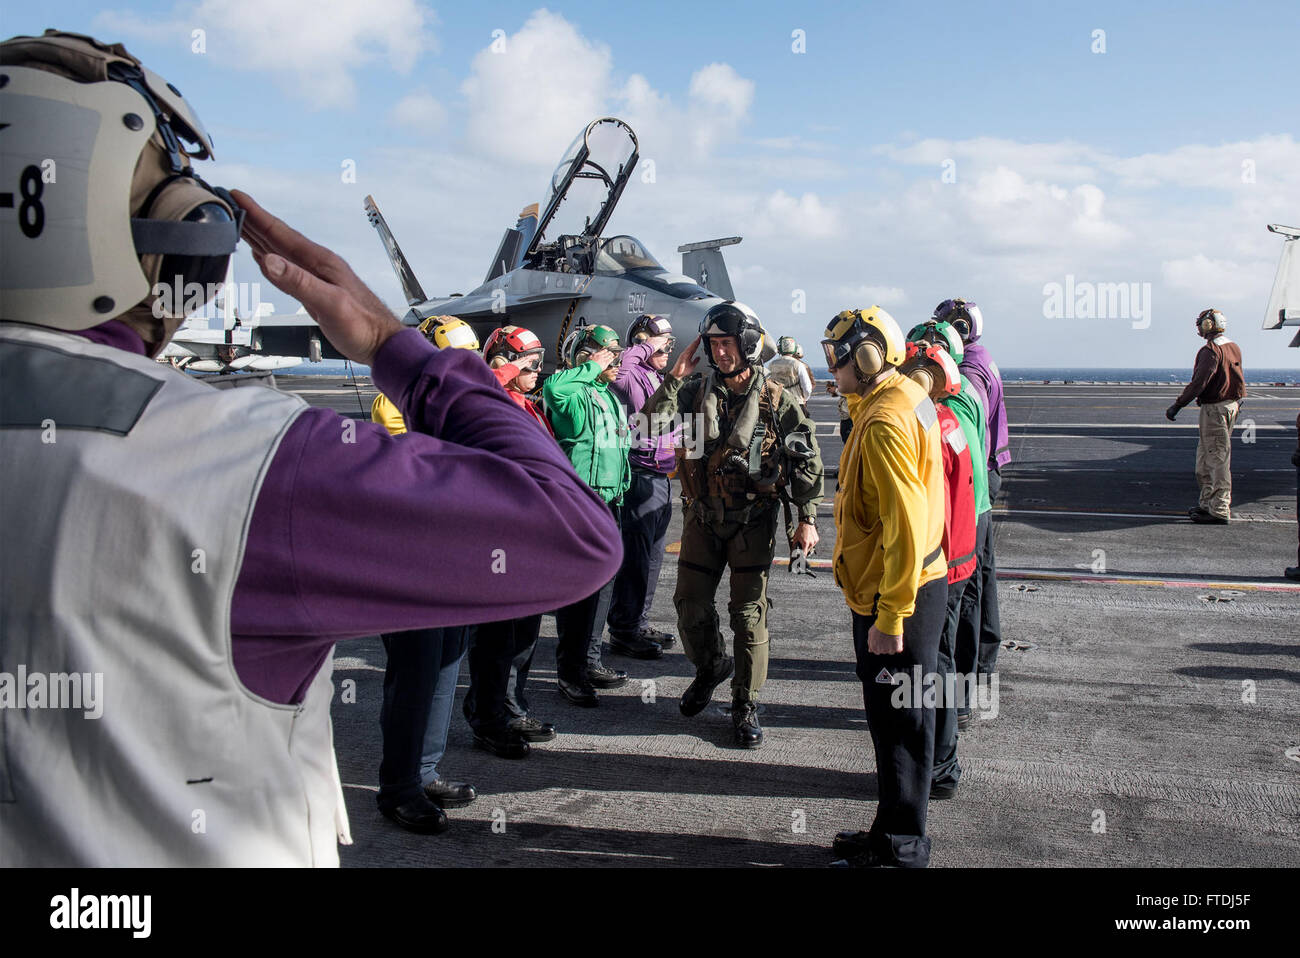 151126-N-ZG705-143  ATLANTIC OCEAN (Nov. 26, 2015) Sailors aboard aircraft carrier USS Harry S. Truman (CVN 75) greet Chief of Naval Operations Adm. John M. Richardson on the flight deck. Richardson visited Harry S. Truman for the Thanksgiving holiday with Master Chief Petty Officer of the Navy Mike Stevens. Harry S. Truman Carrier Strike Group is deployed to support maritime security operations and theater security cooperation efforts in the U.S. 5th and 6th Fleet areas of operation. (U.S. Navy photo by Mass Communication Specialist 2nd Class K. H. Anderson/Released) Stock Photo